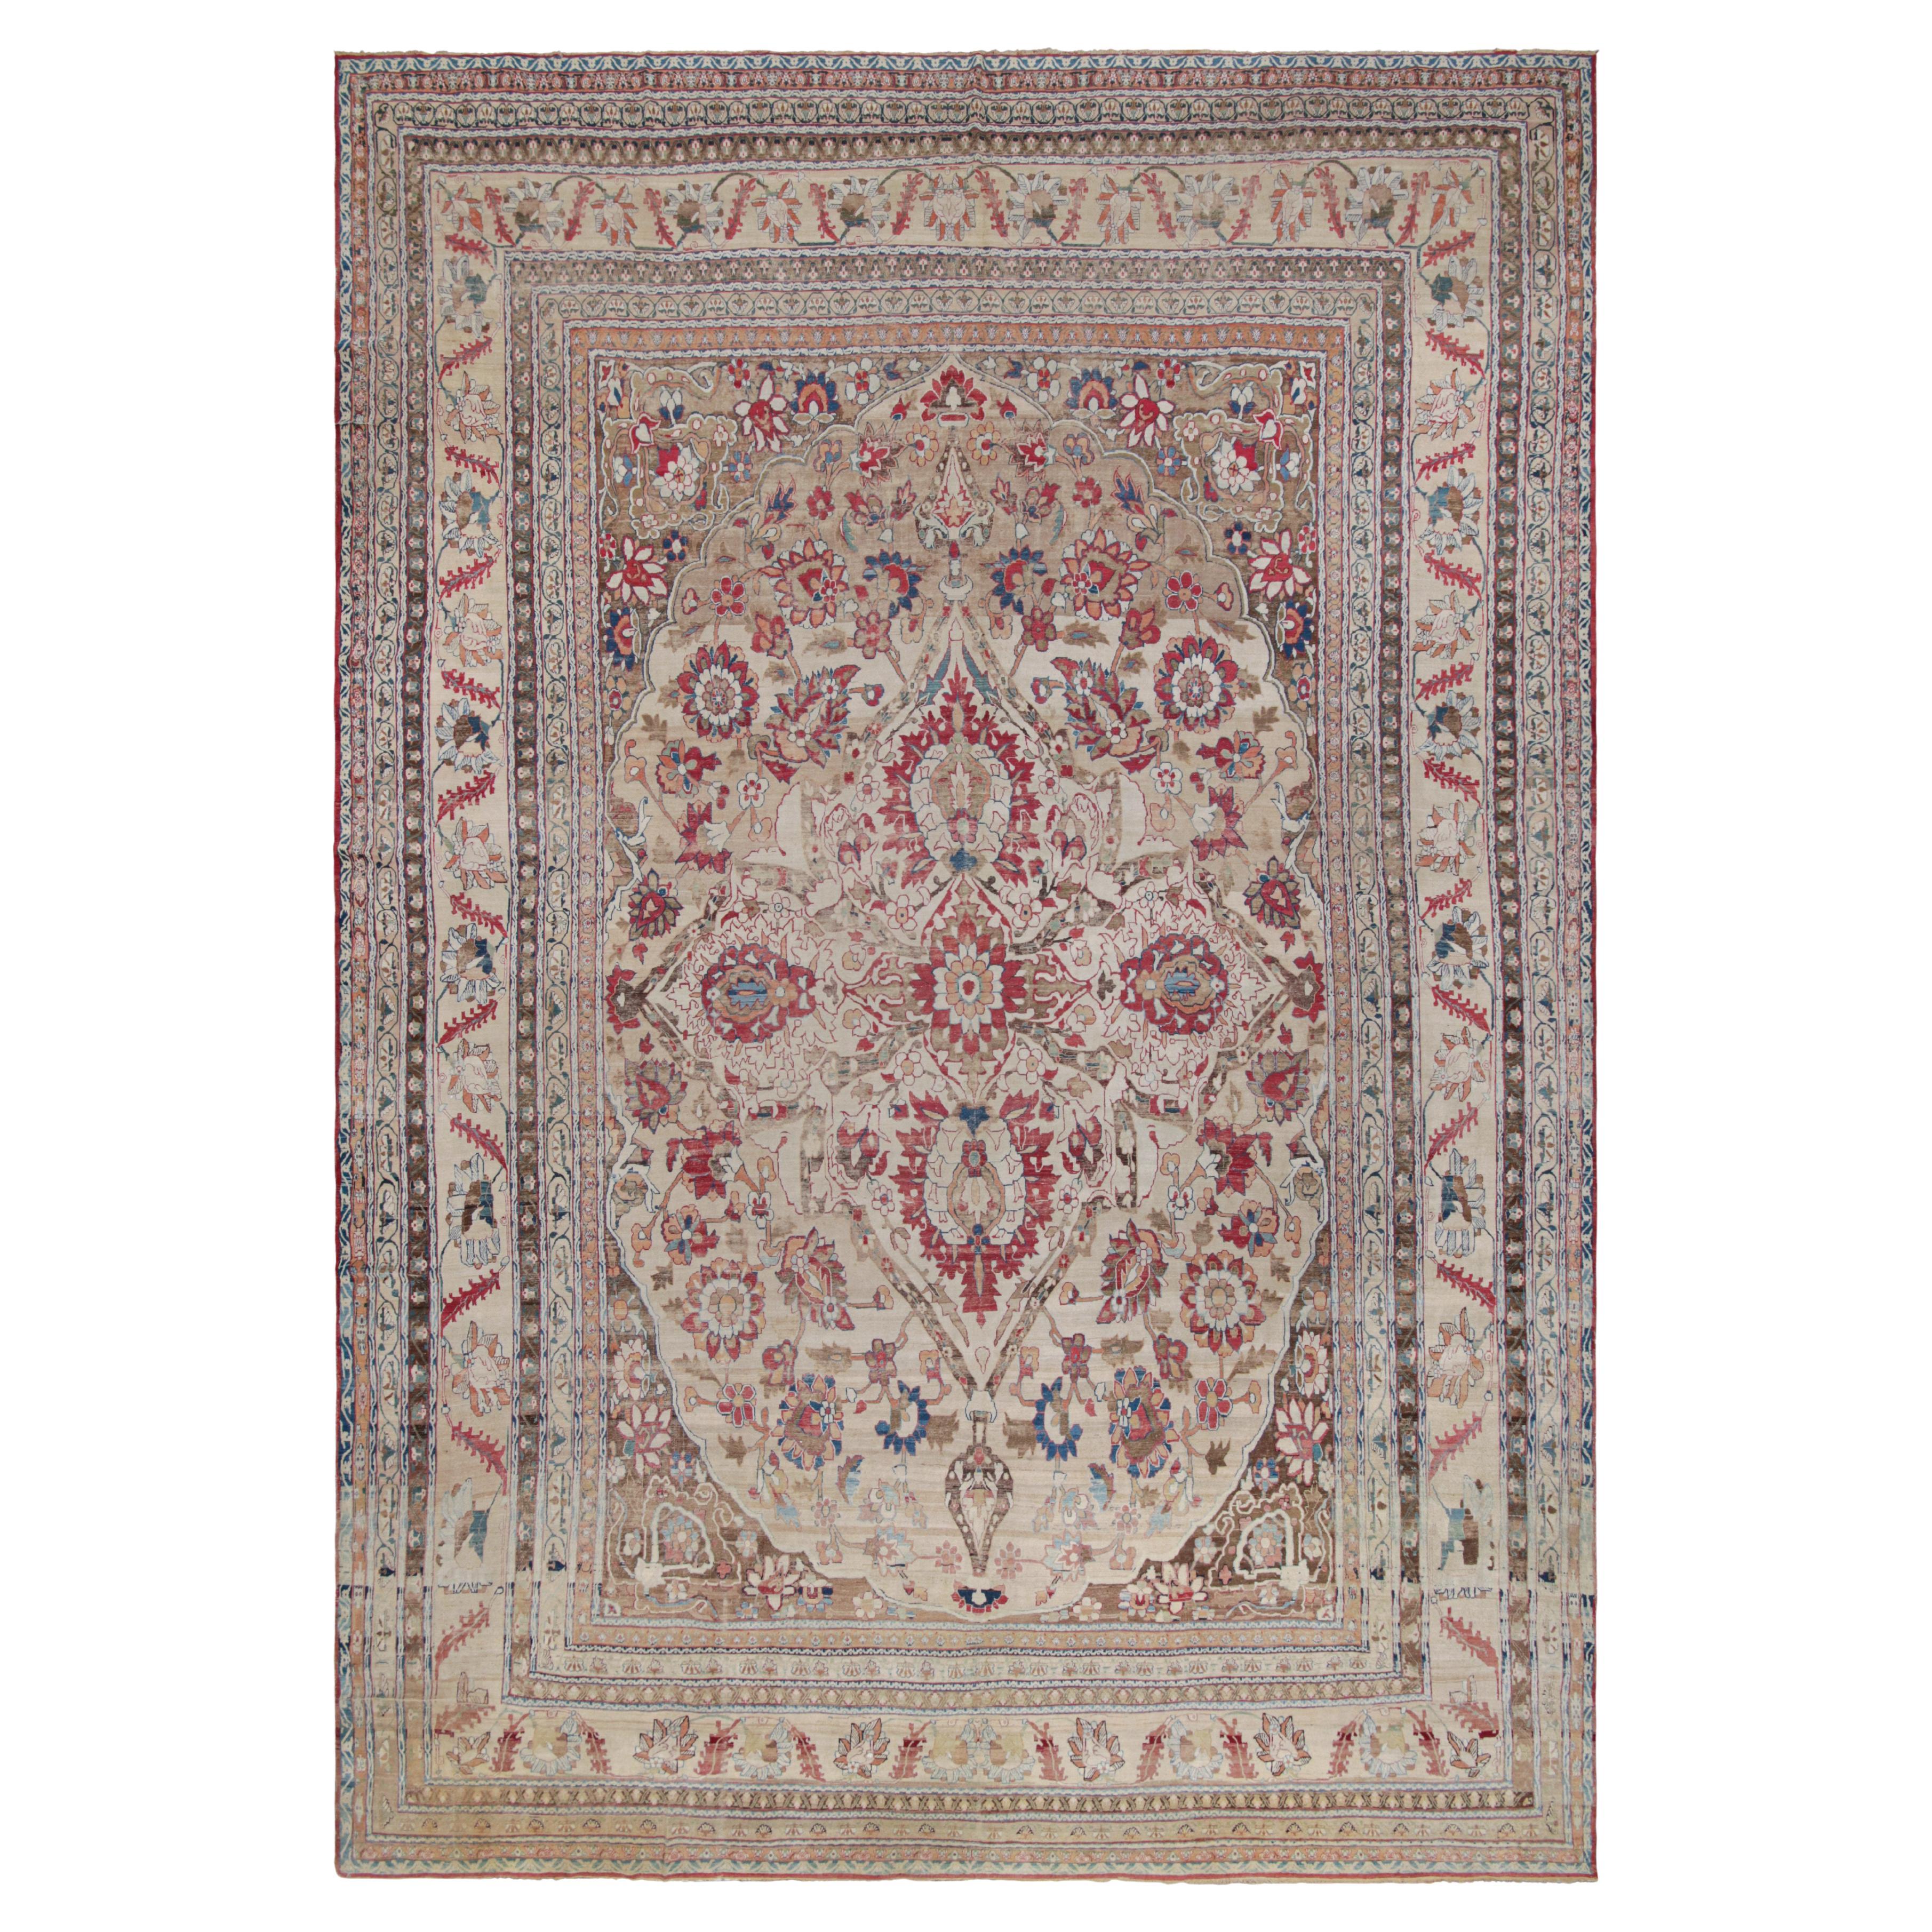 Oversized Antique Persian Kermanshah Rug with Floral Patterns For Sale